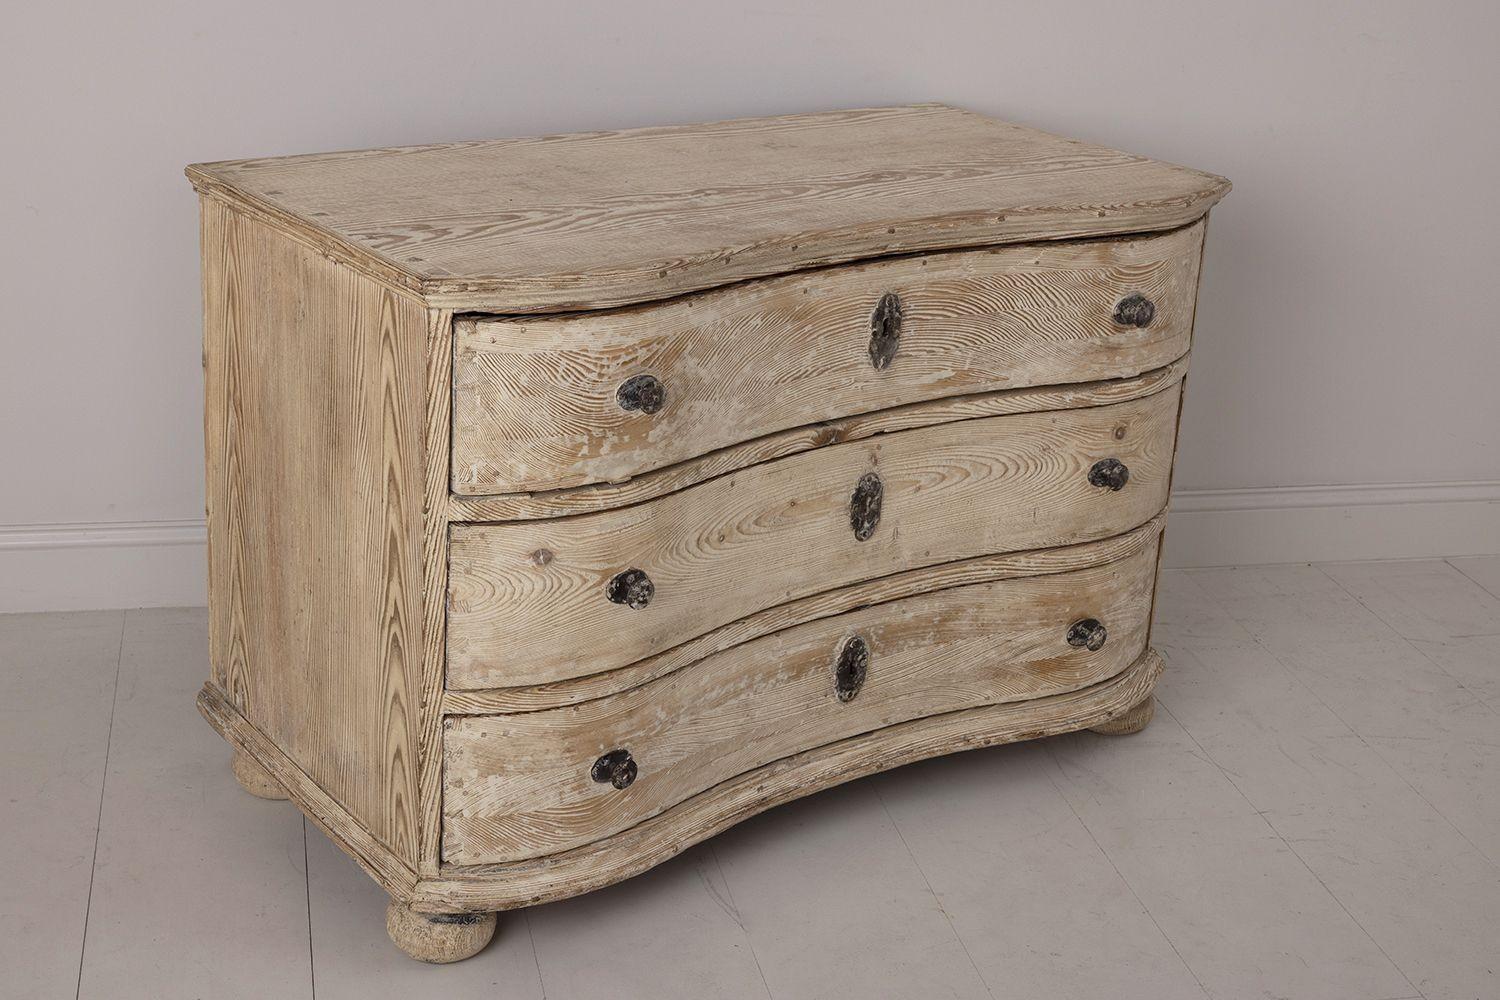 An 18th c. German chest of drawers from the Baroque period wearing its original, natural patina. Serpentine front, four bun feet, and original hardware. The shaped drawers are spacious and move easily. Circa 1770. Found in Provence, France.
 